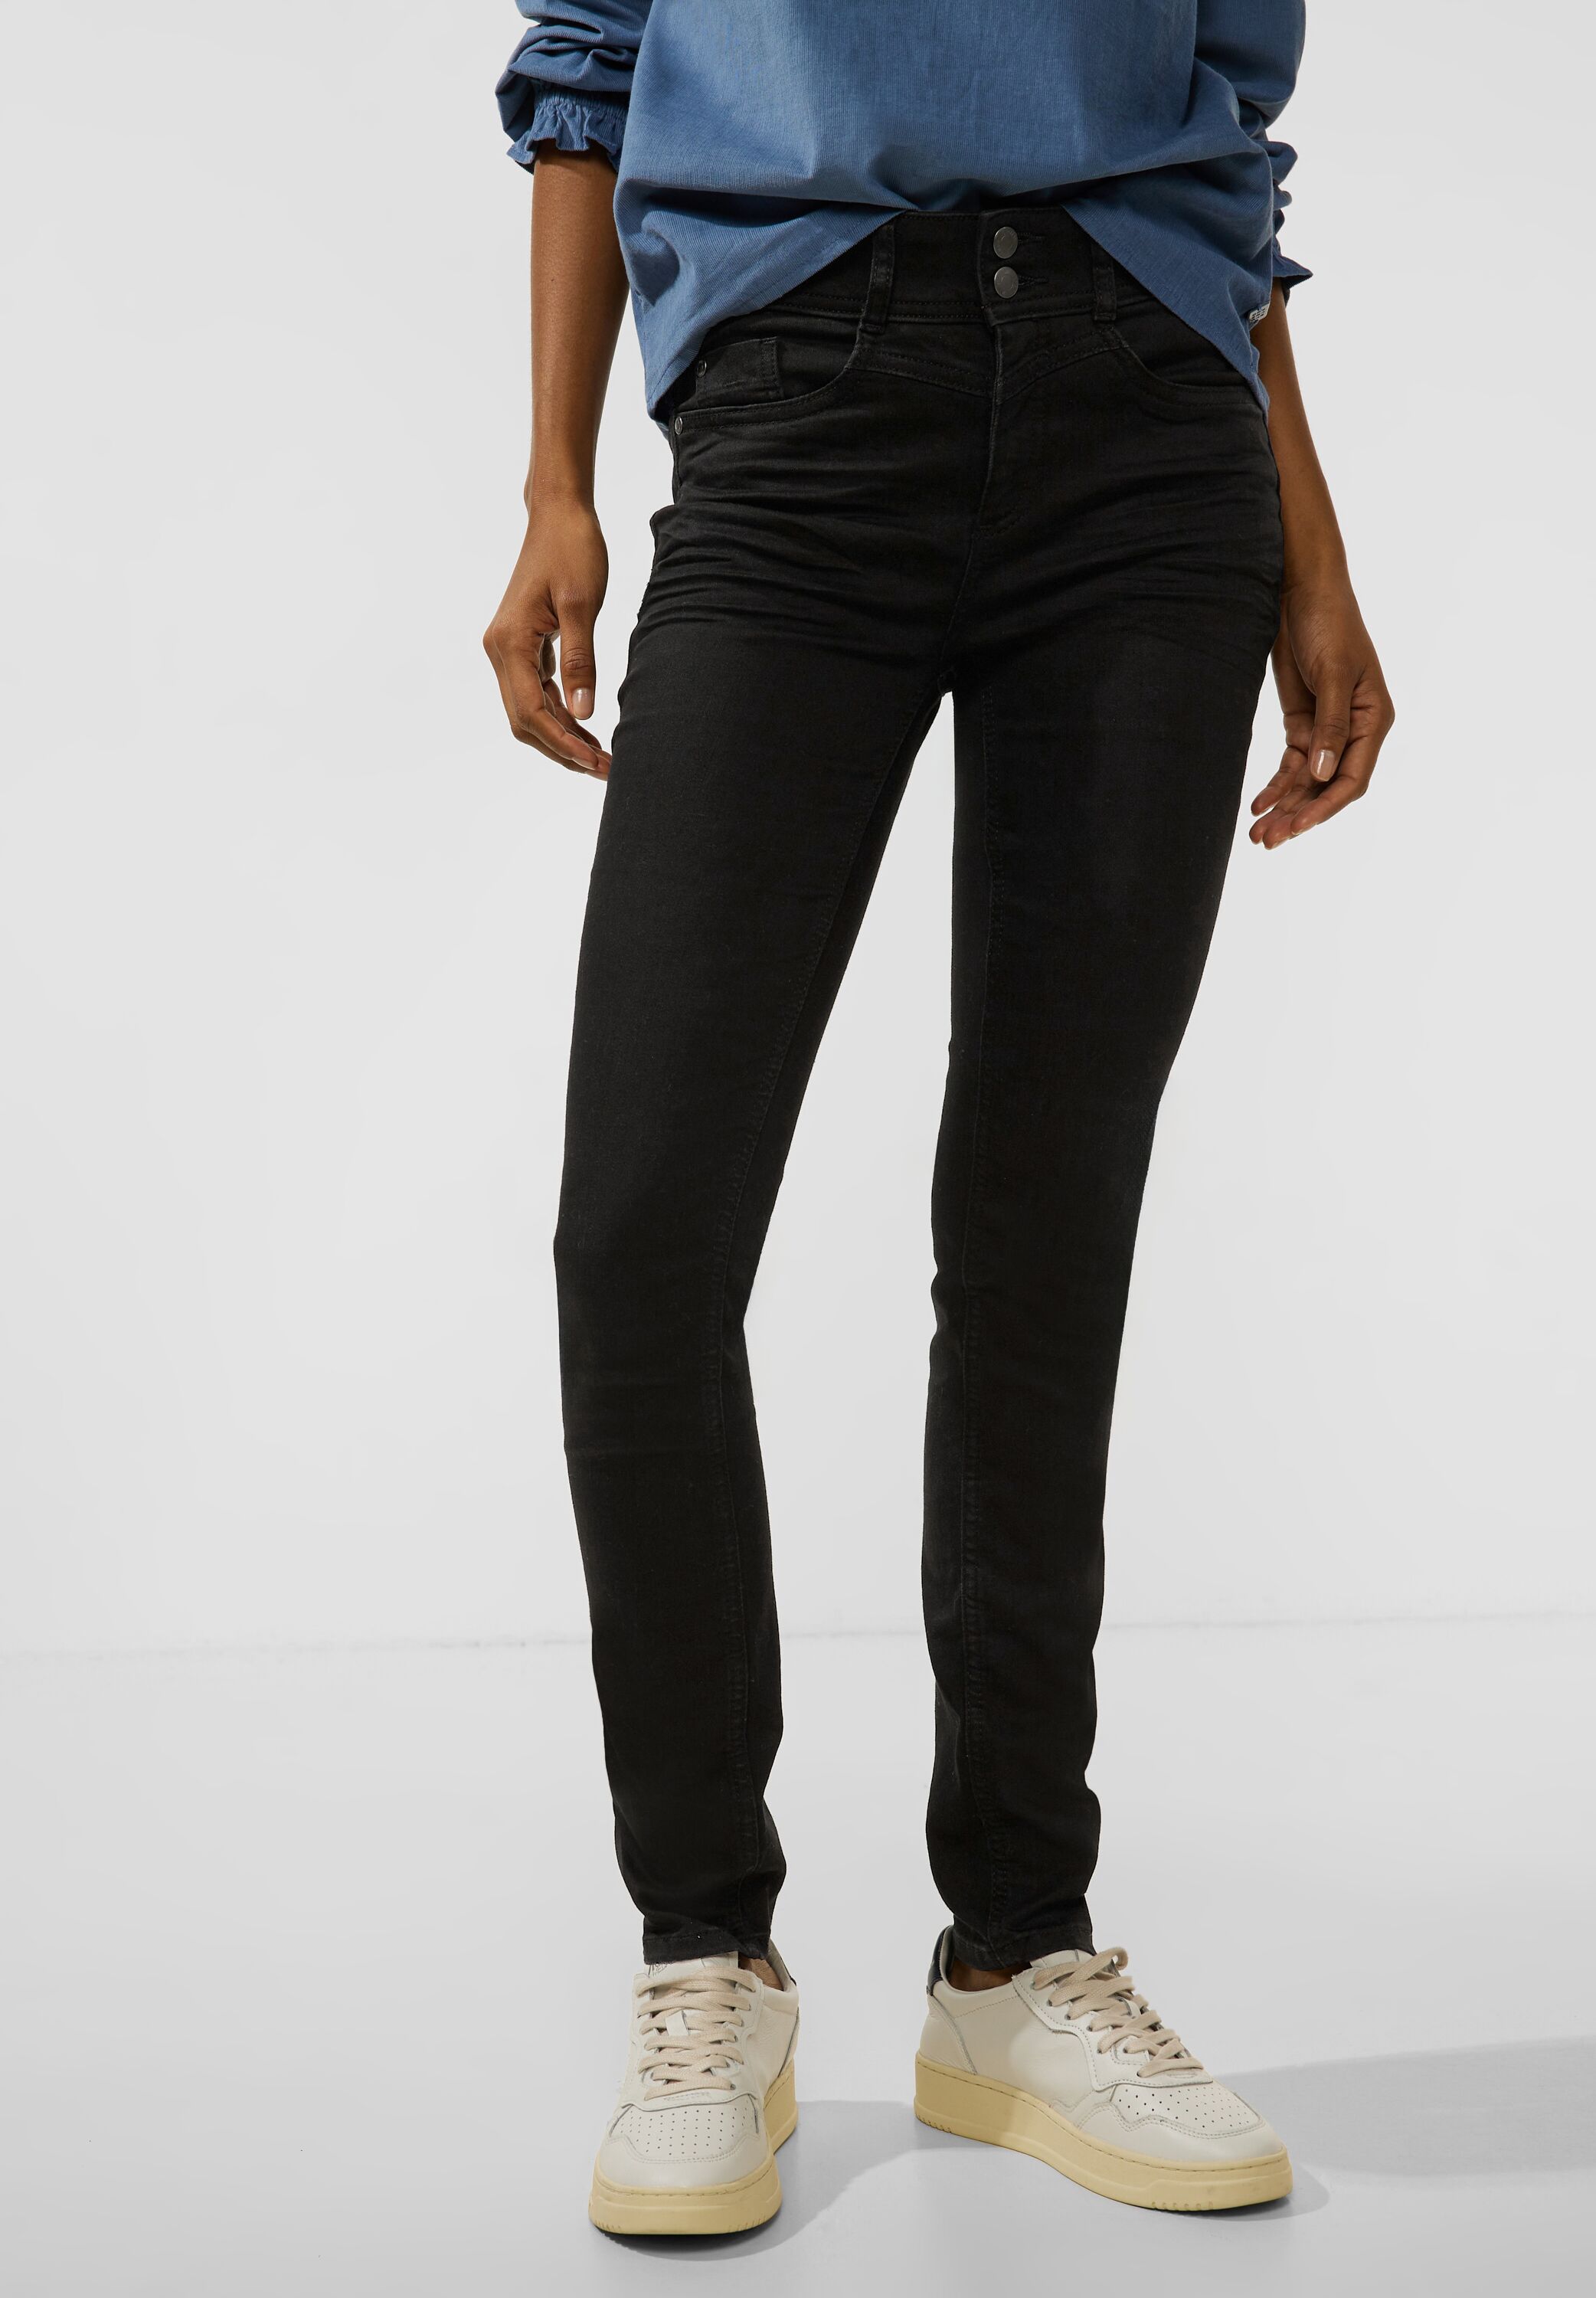 Street One Jeans York Mode A376539-15111 in Wash - Rinsed Black CONCEPT